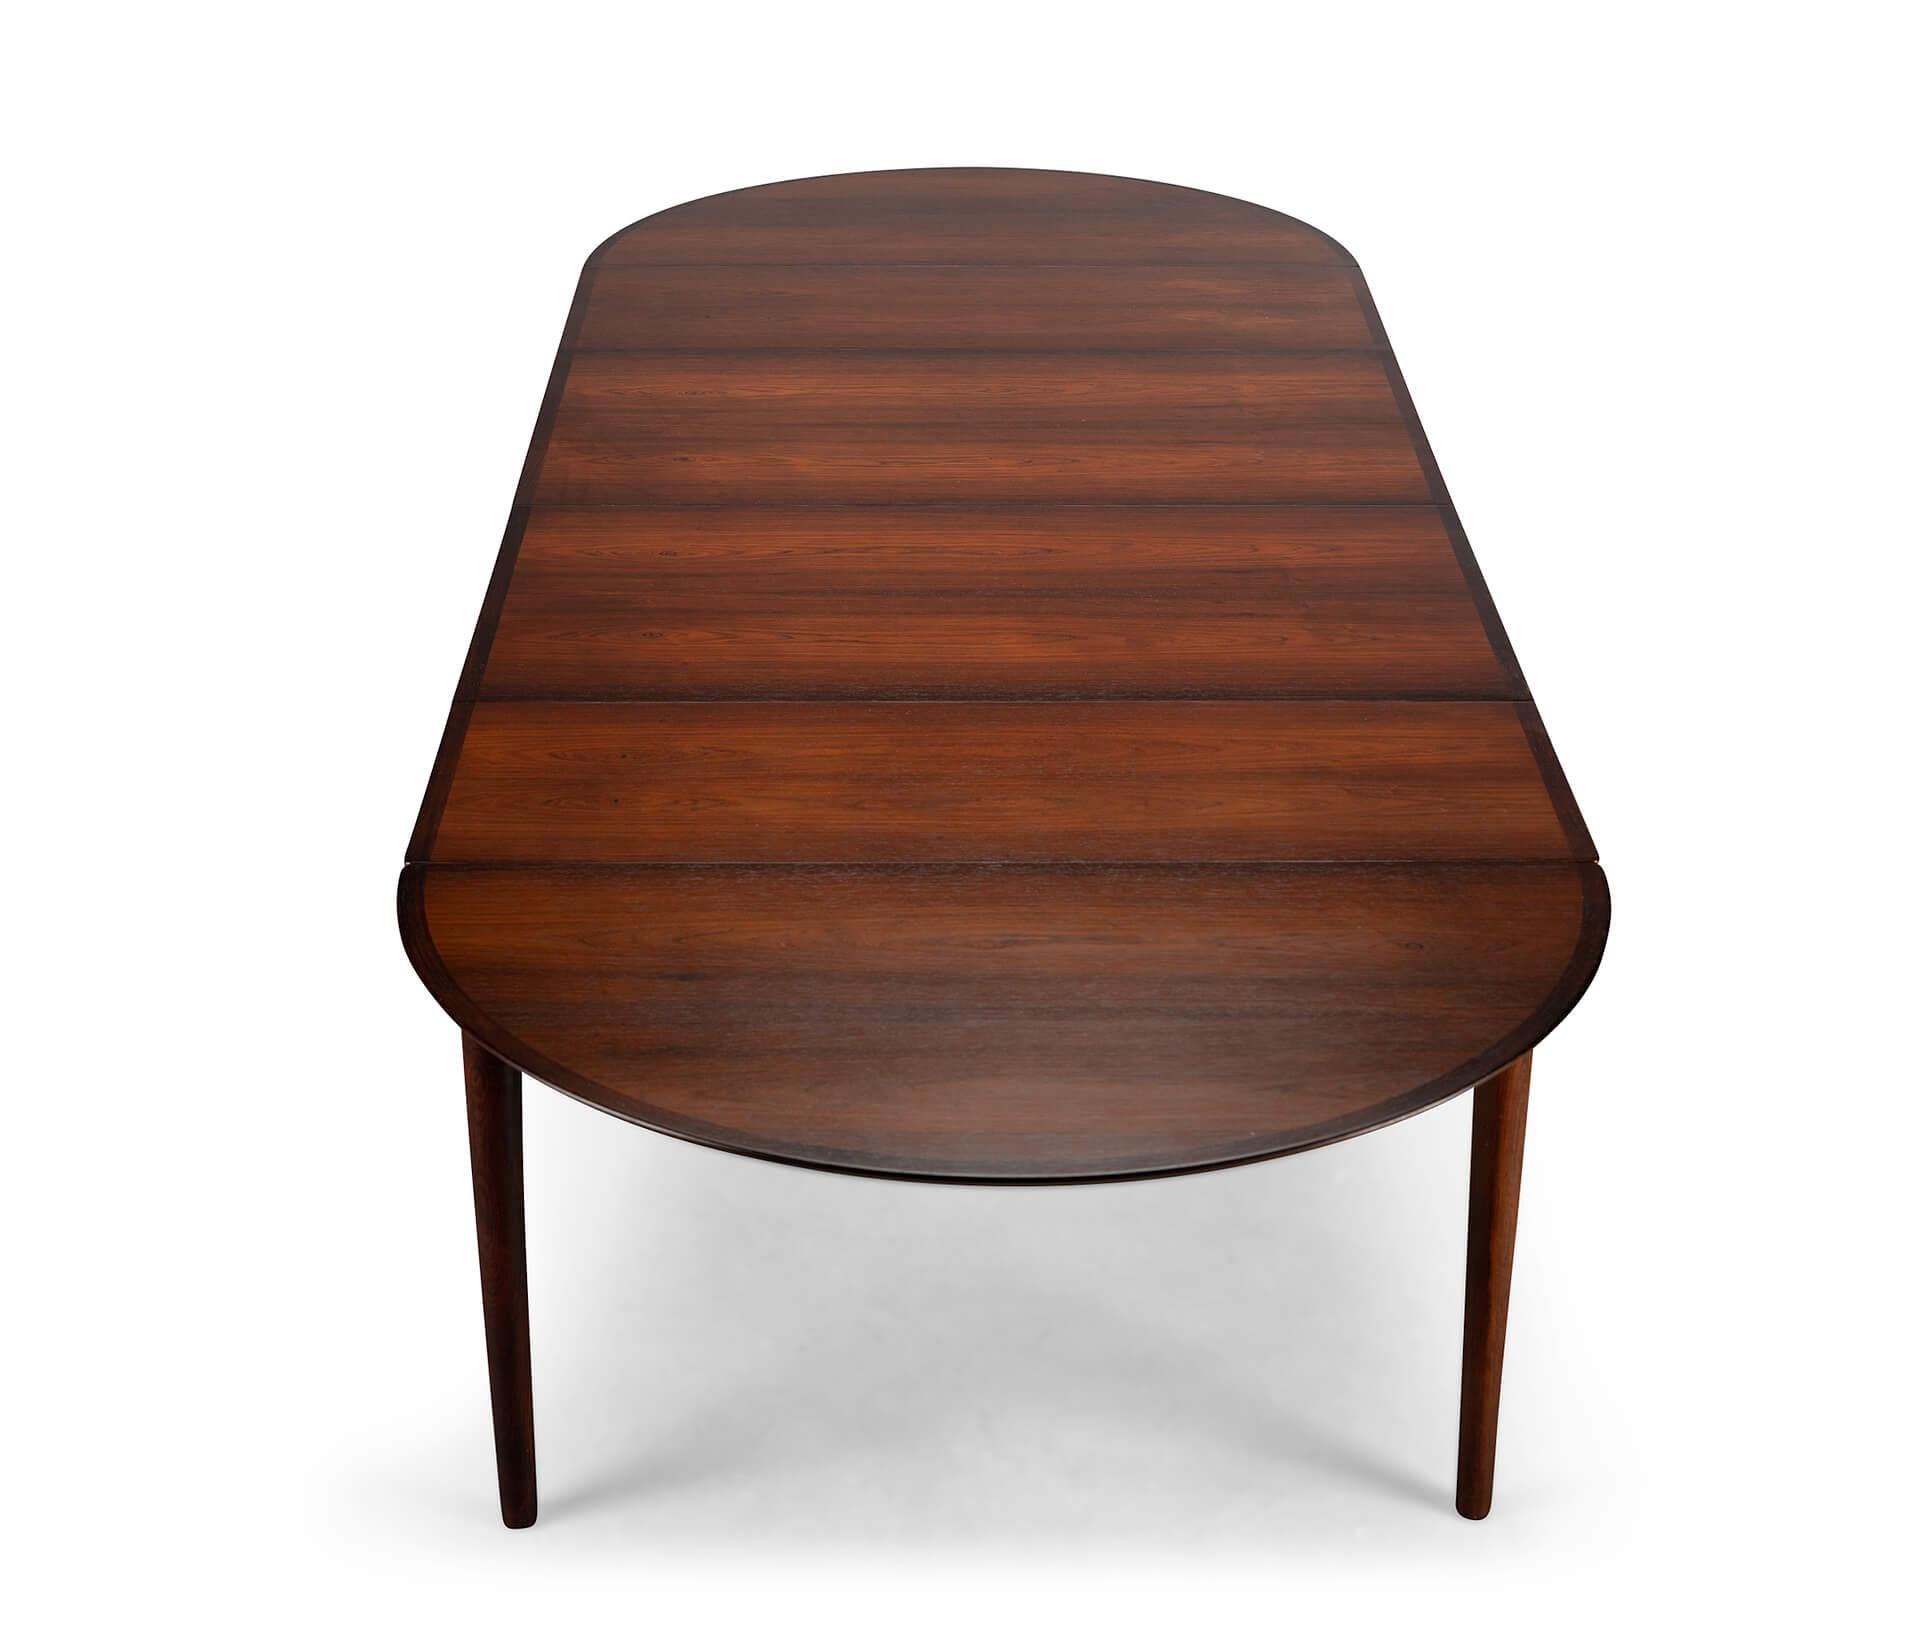 Table Model 227 by Arne Vodder This gorgeous classic Danish Model 227 dining table by Arne Vodder for Sibast was made in the 1960s. This particular adjustable dining table is made off rosewood. The table convinces with it's very high quality